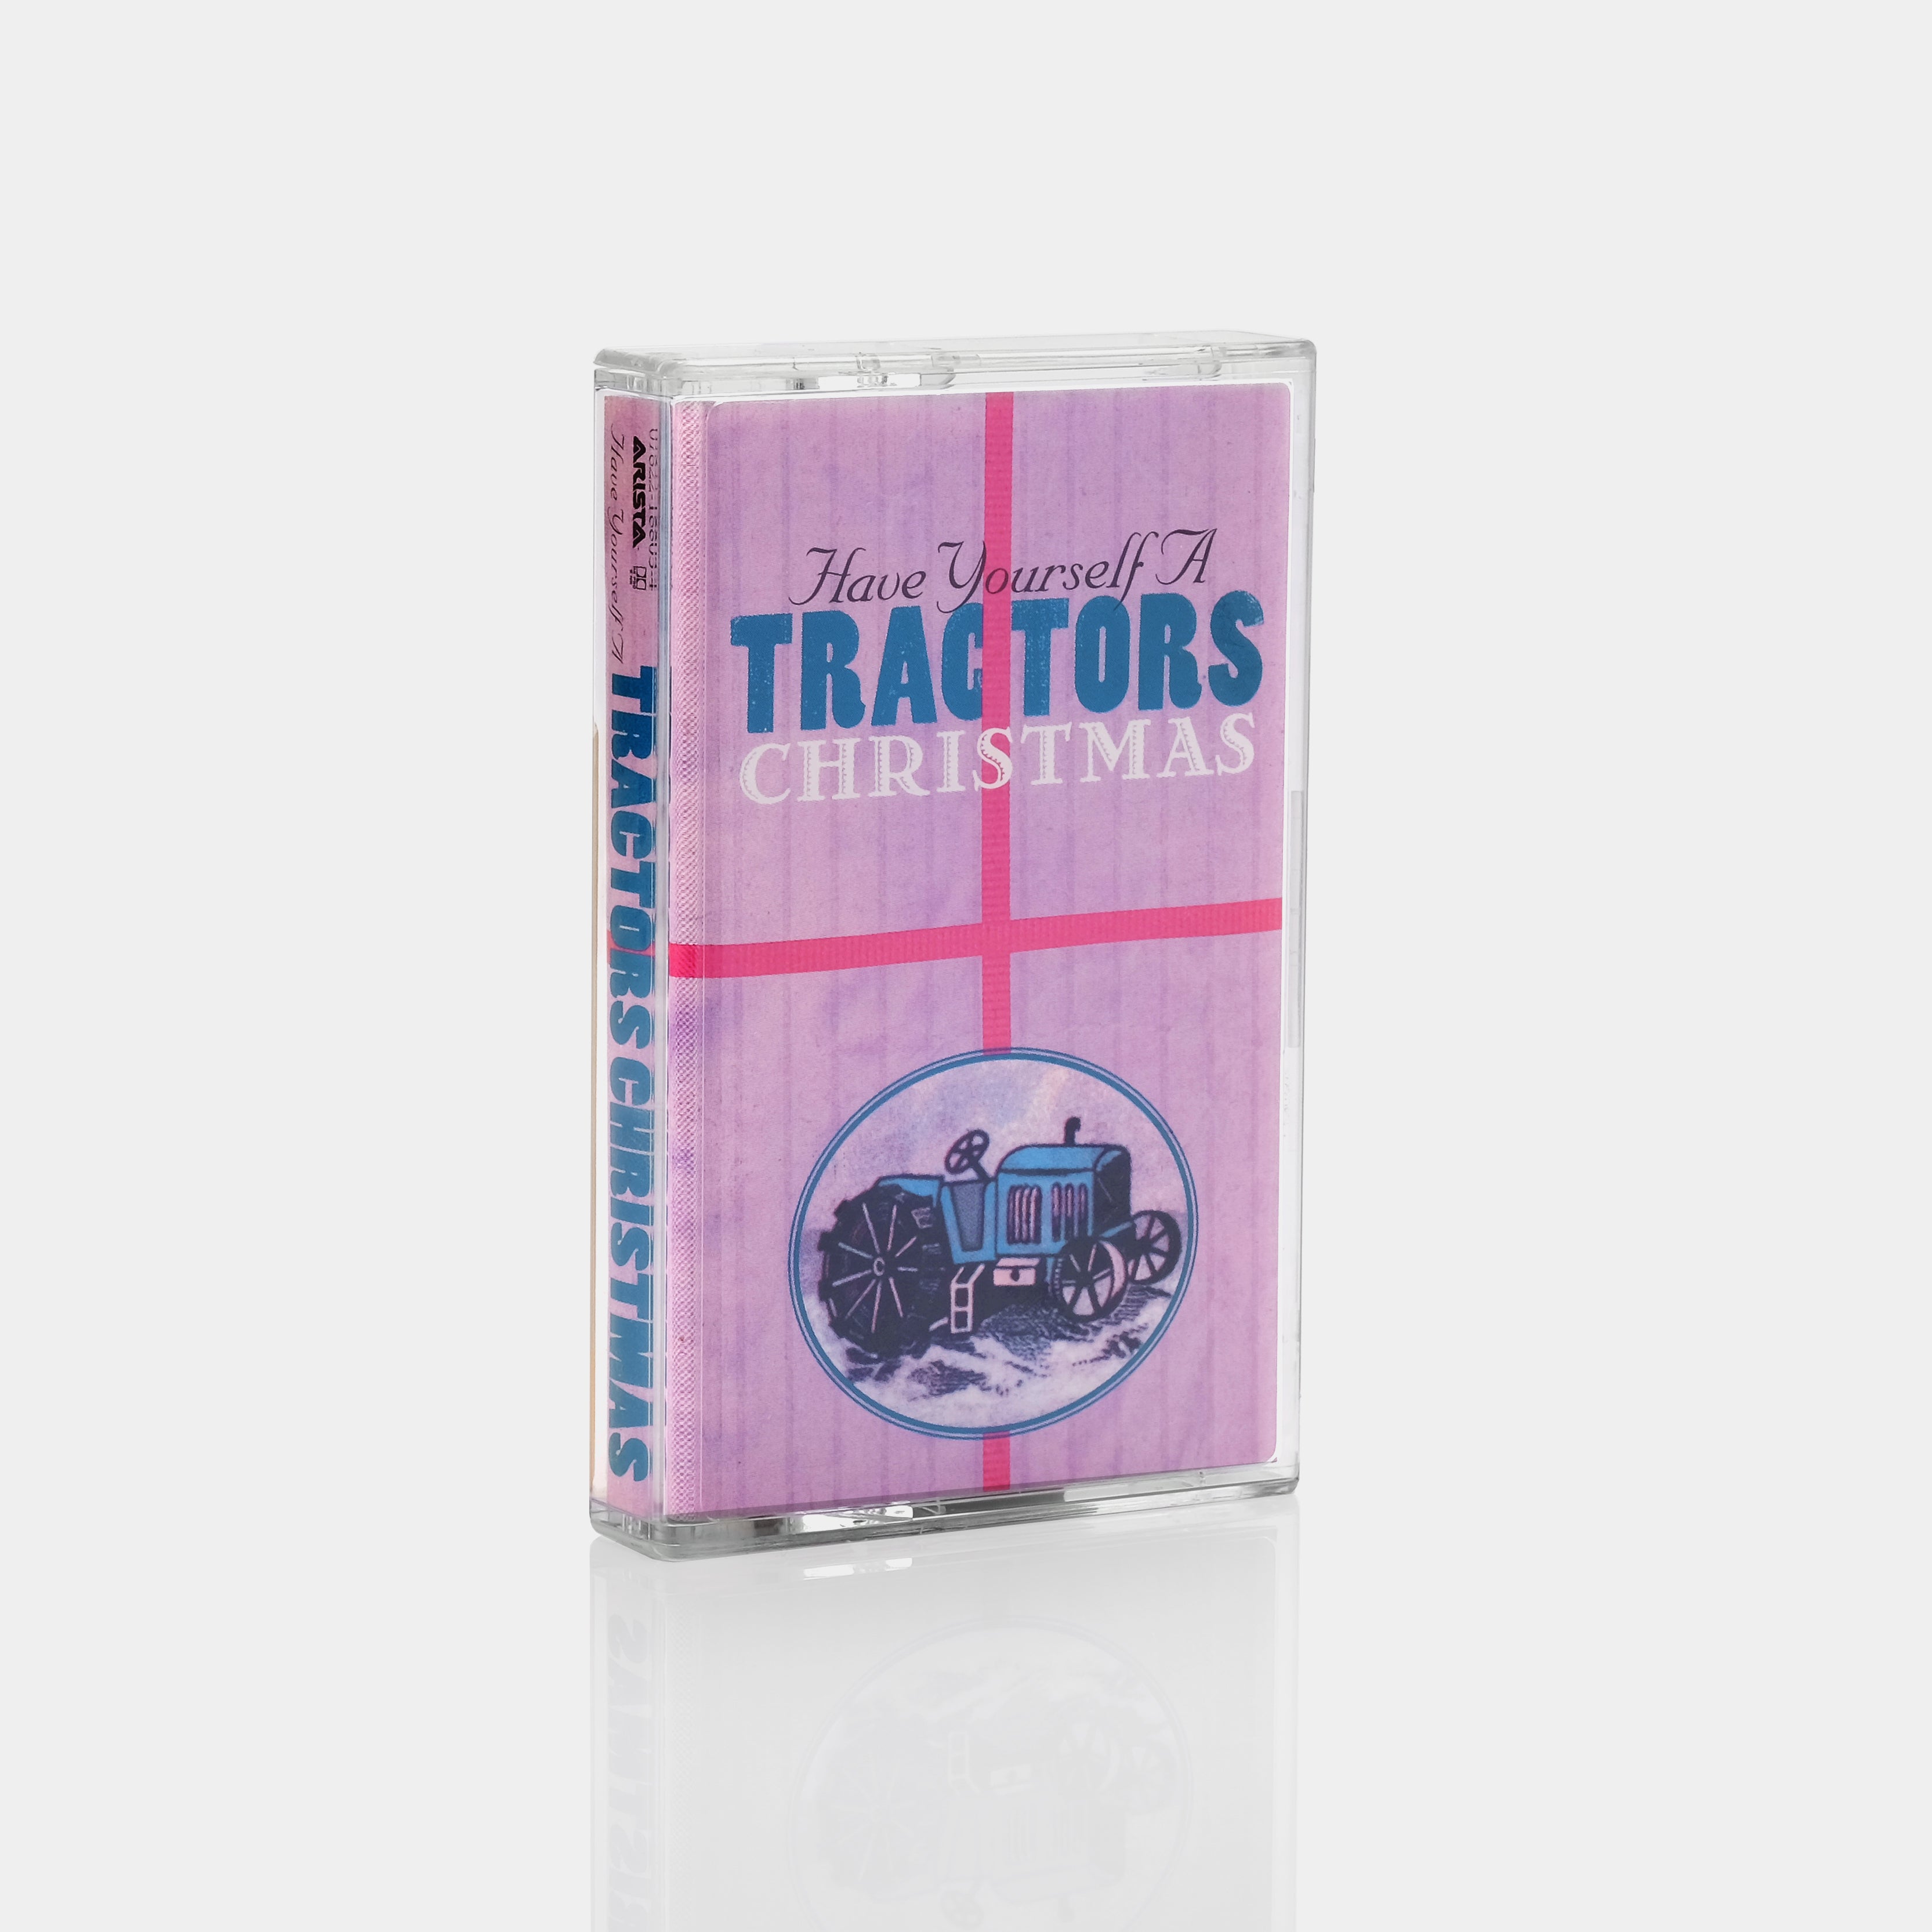 The Tractors - Have Yourself A Tractors Christmas Cassette Tape